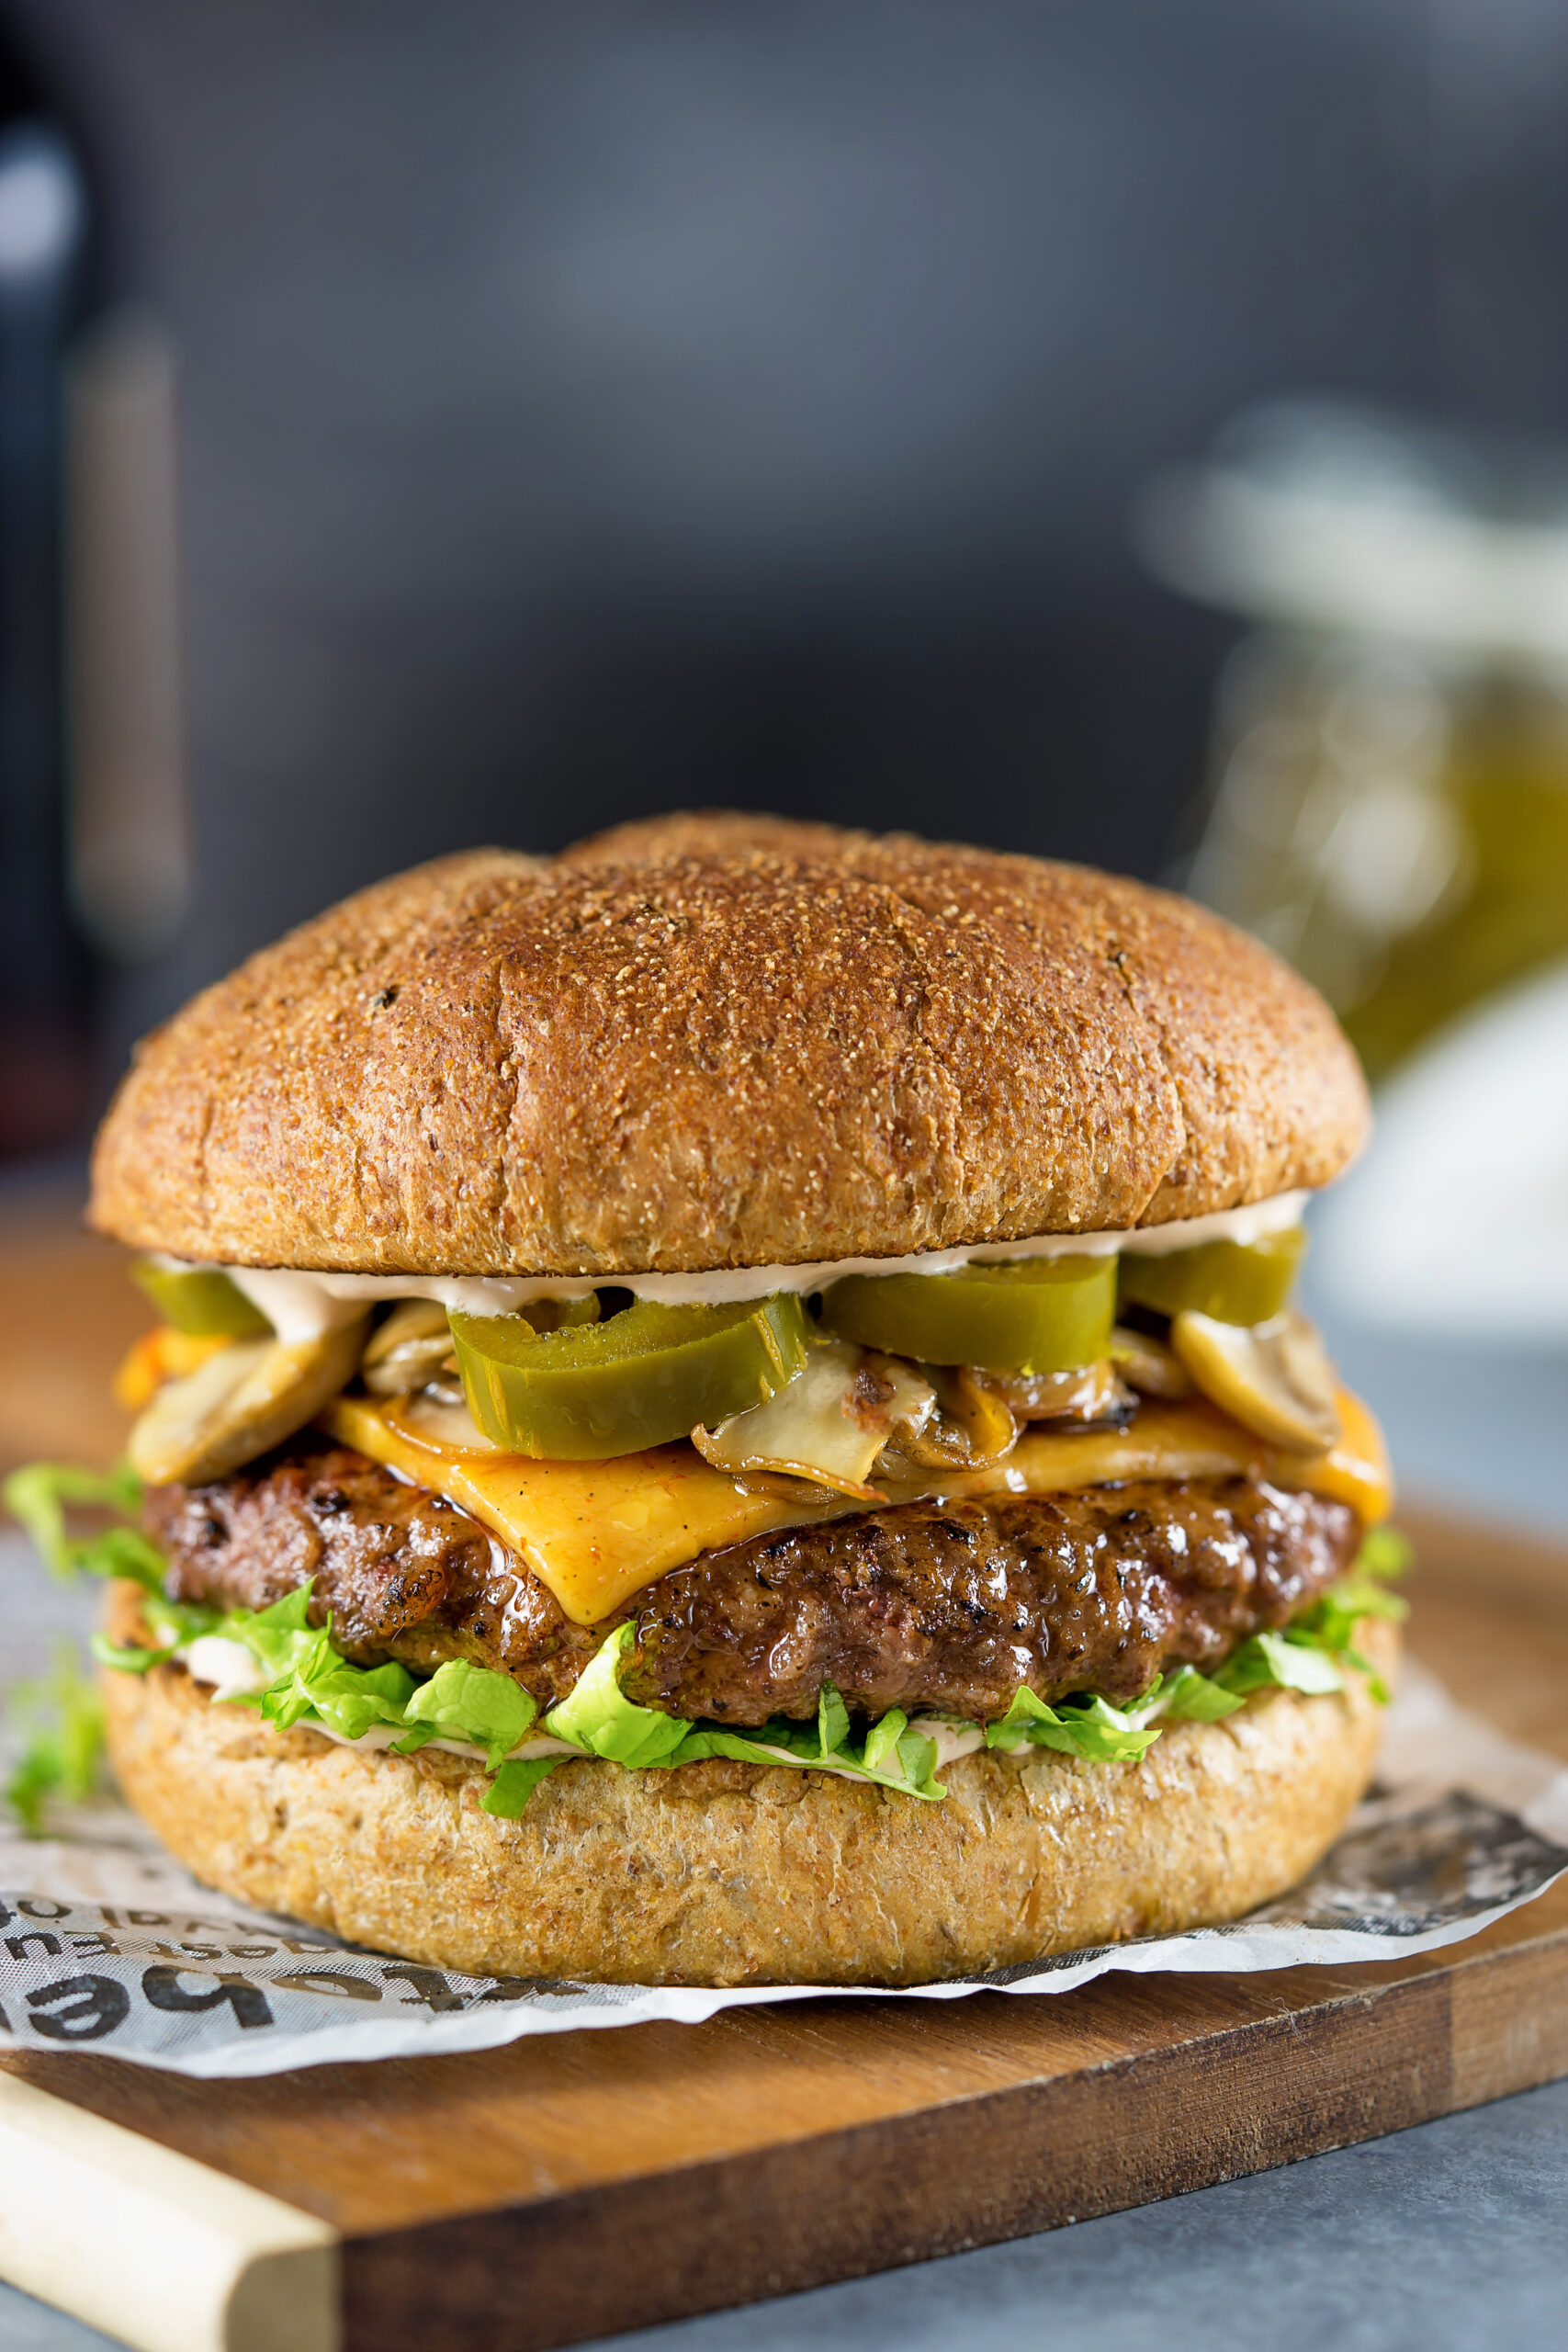 A beef burger topped with onions, jalapeno and cheese.